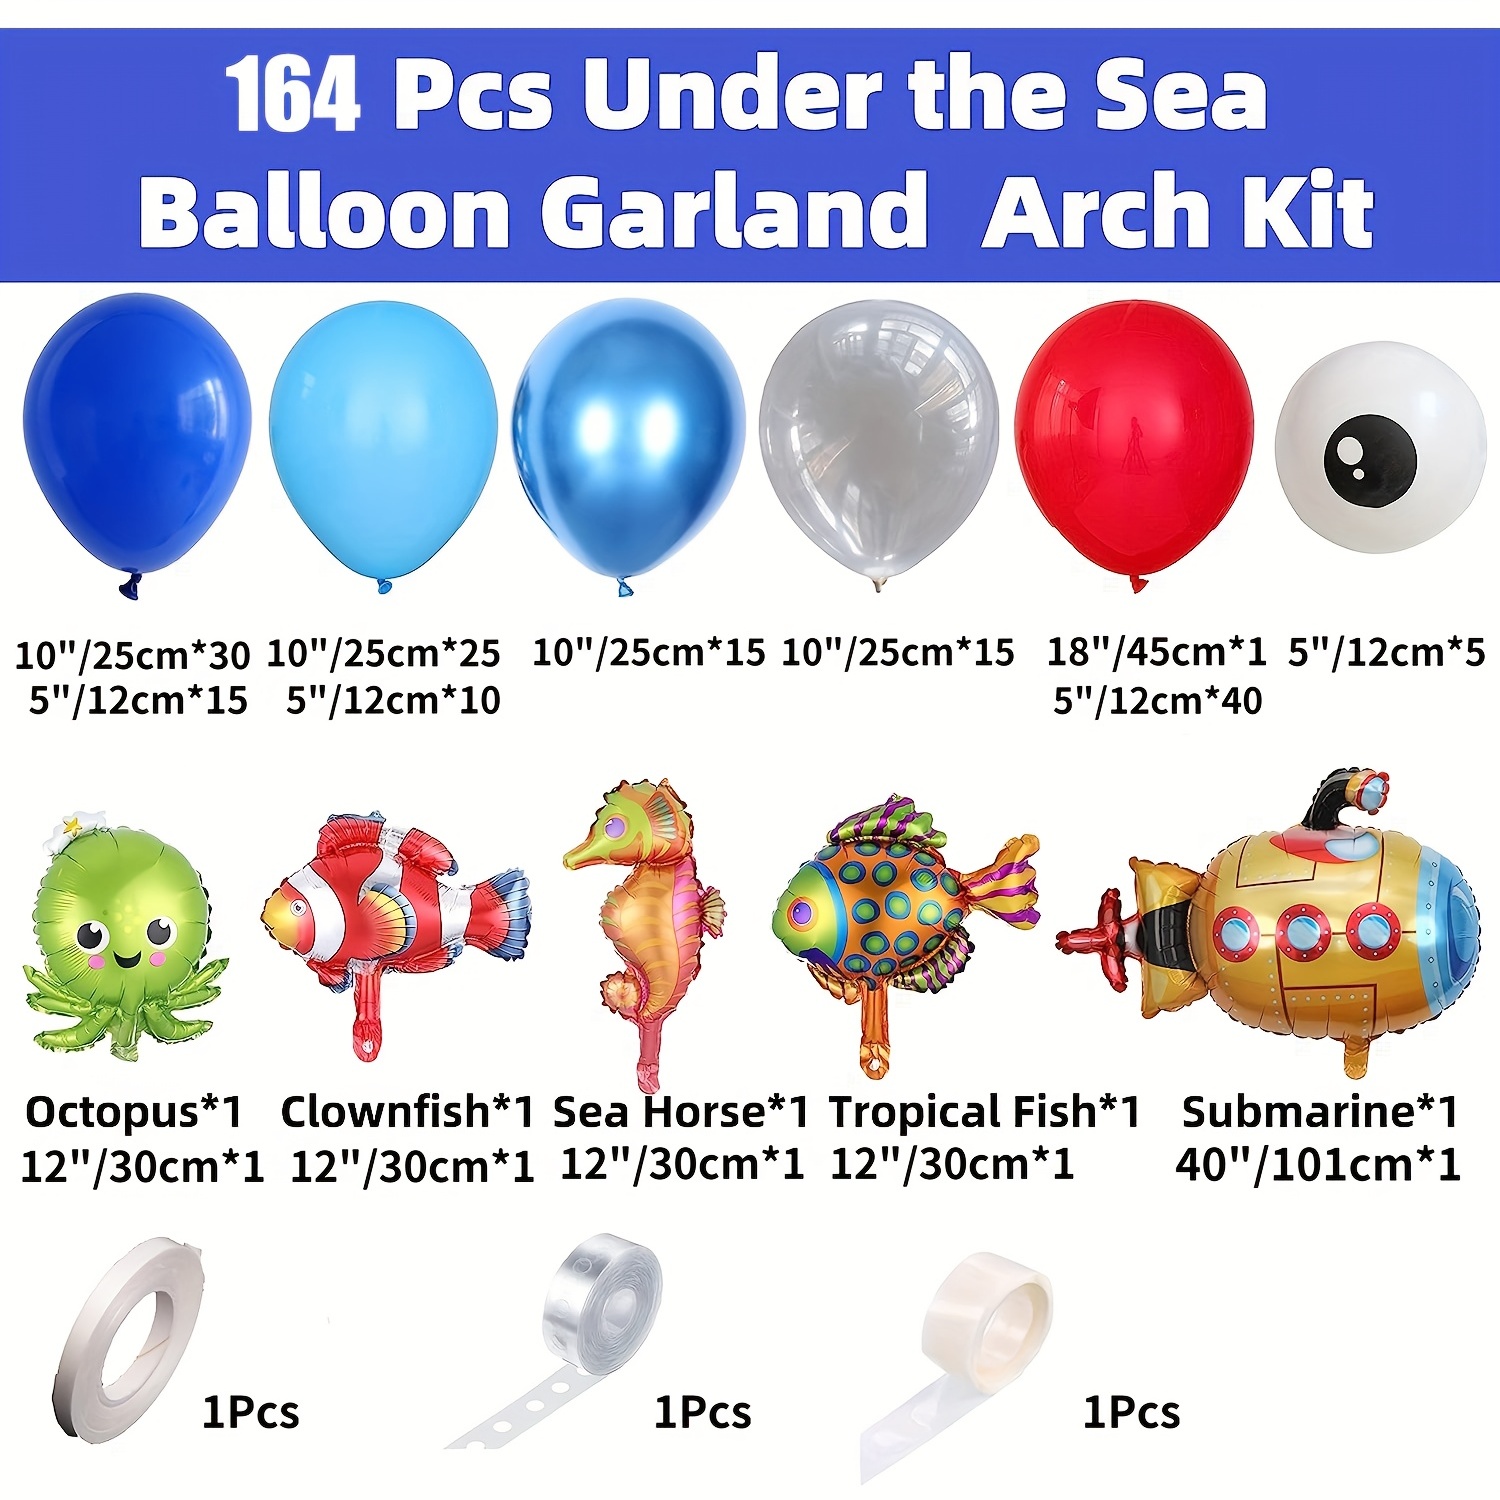 164pcs Ocean Balloon Garland Arch Kit, Under The Sea Party Decorations With  Fish Sea Horse Submarine And Octopus Balloons For Under The Sea Themed Par